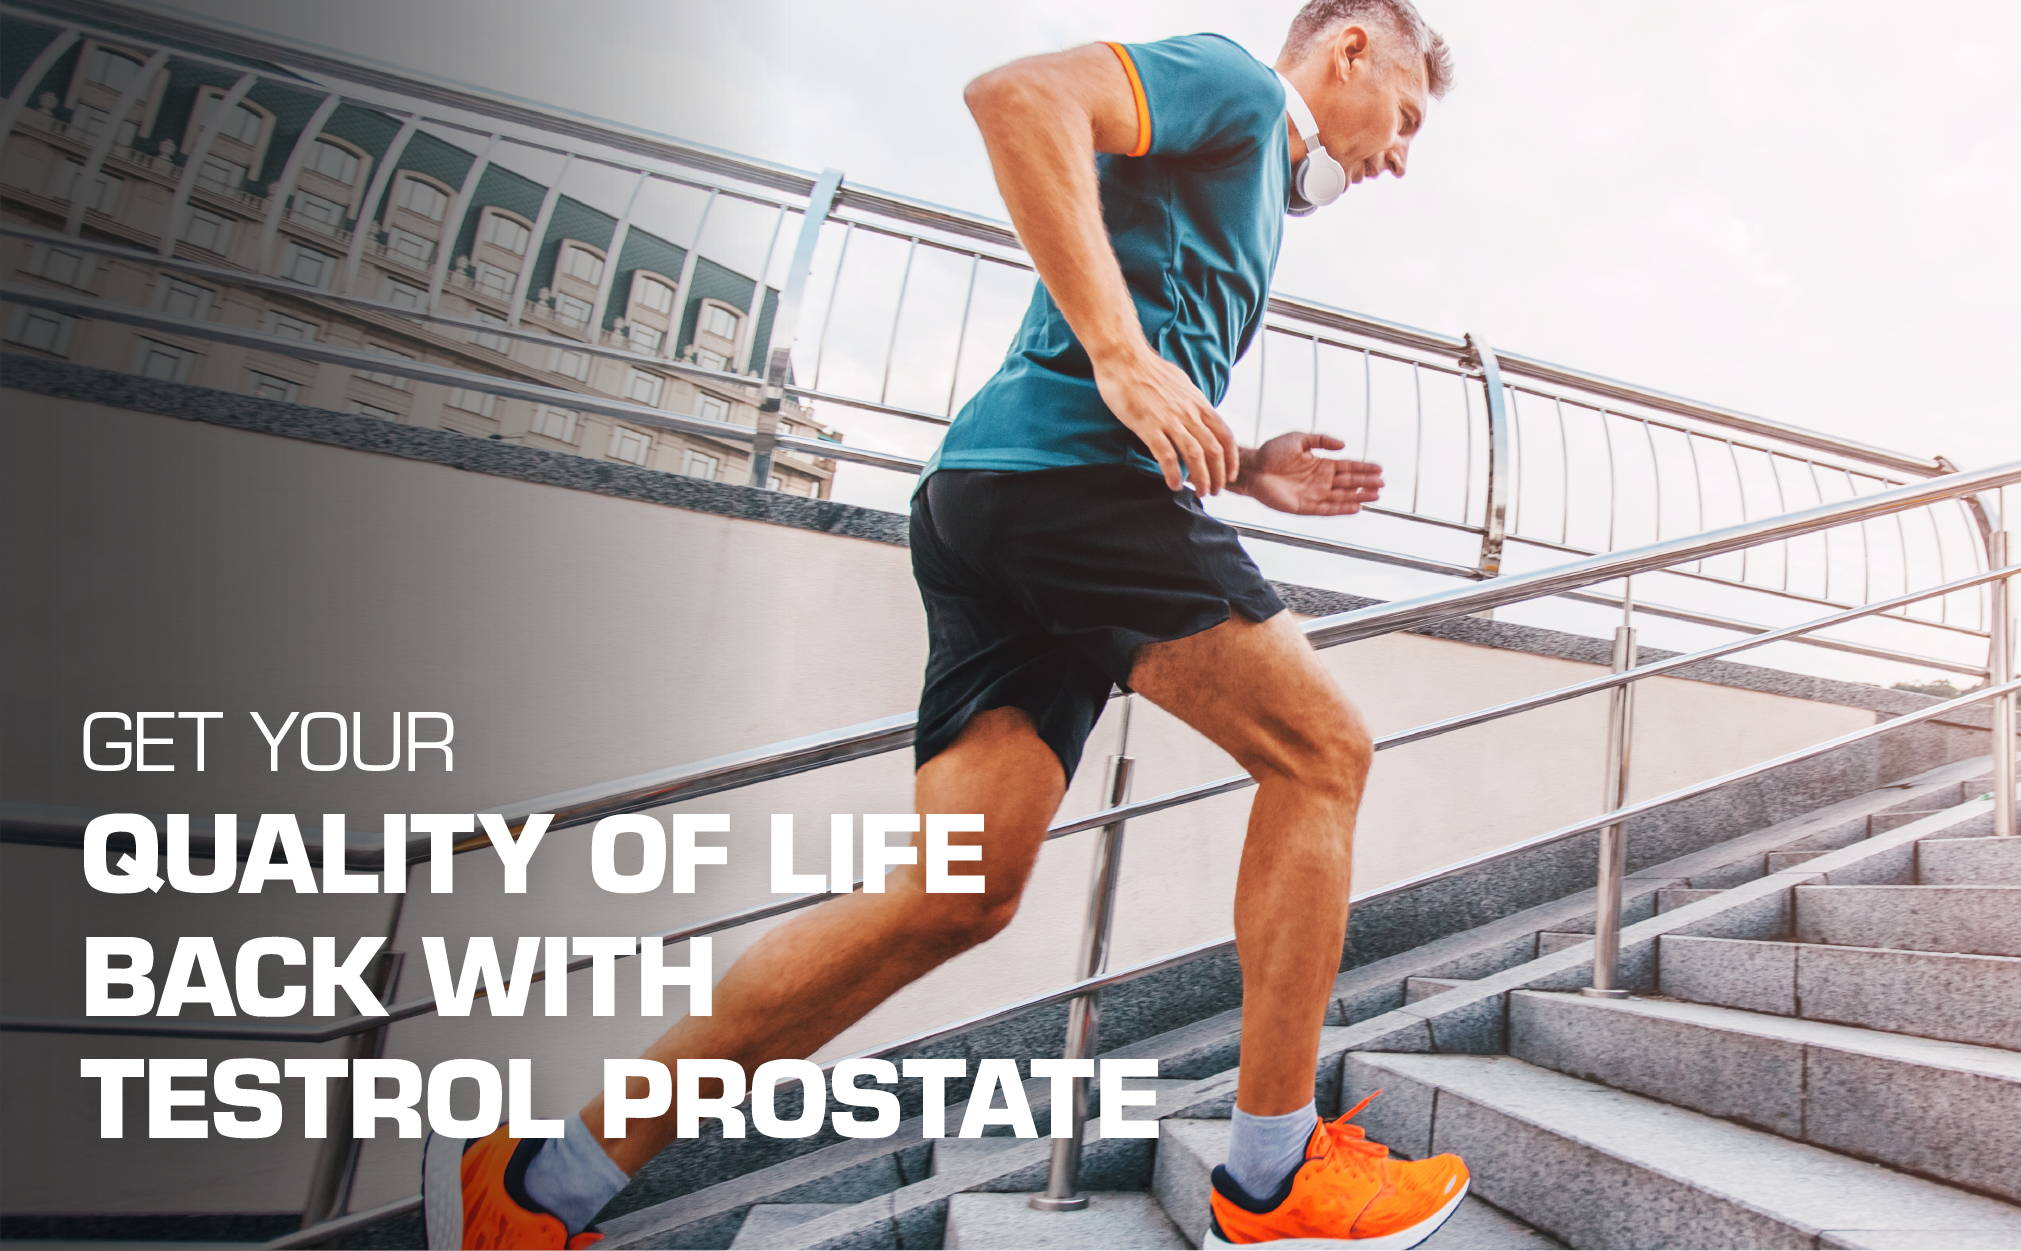 Get your quality of life back with Testrol Prostate